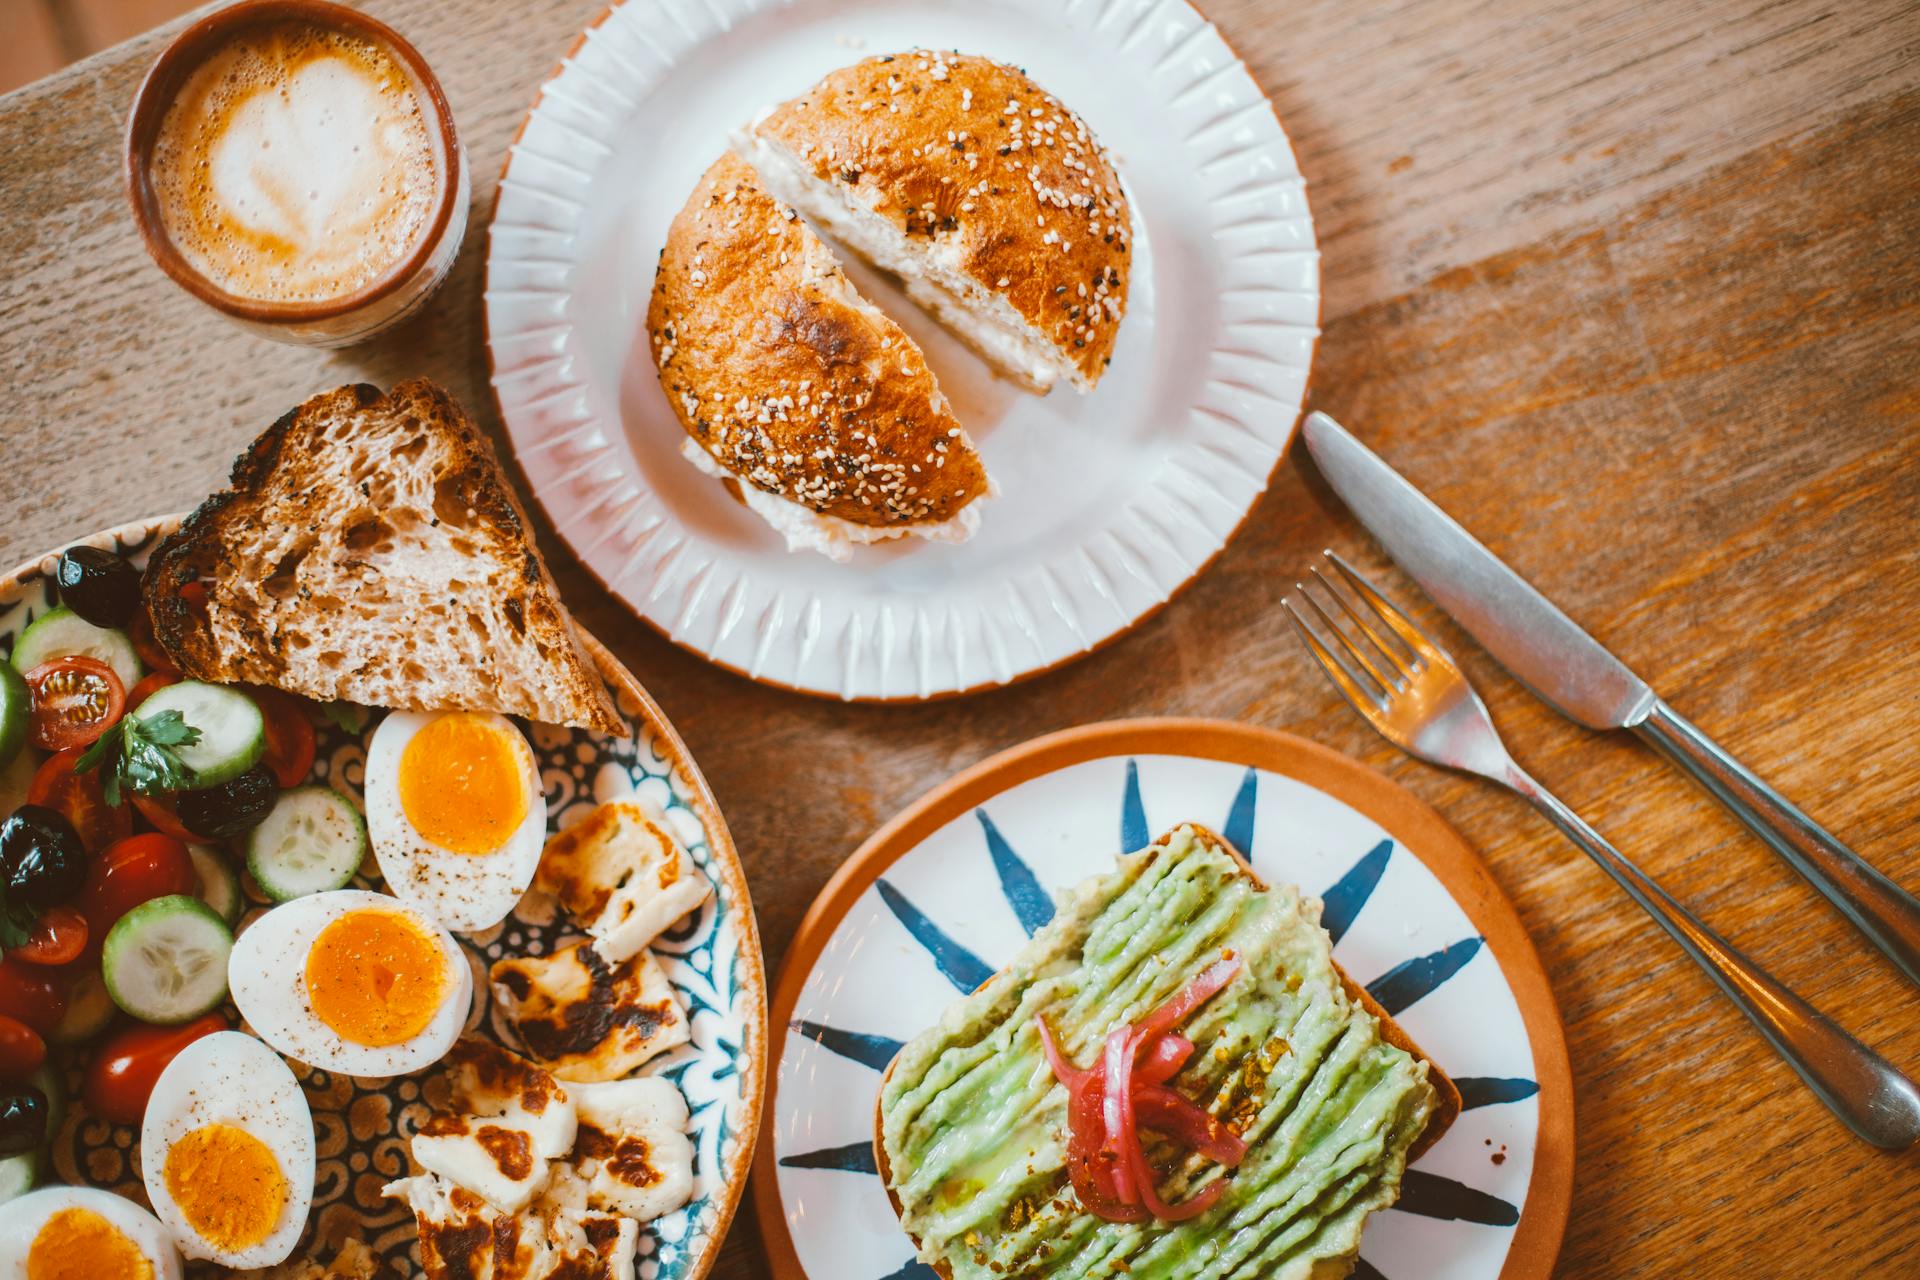 A breakfast spread on a table | Source: Pexels